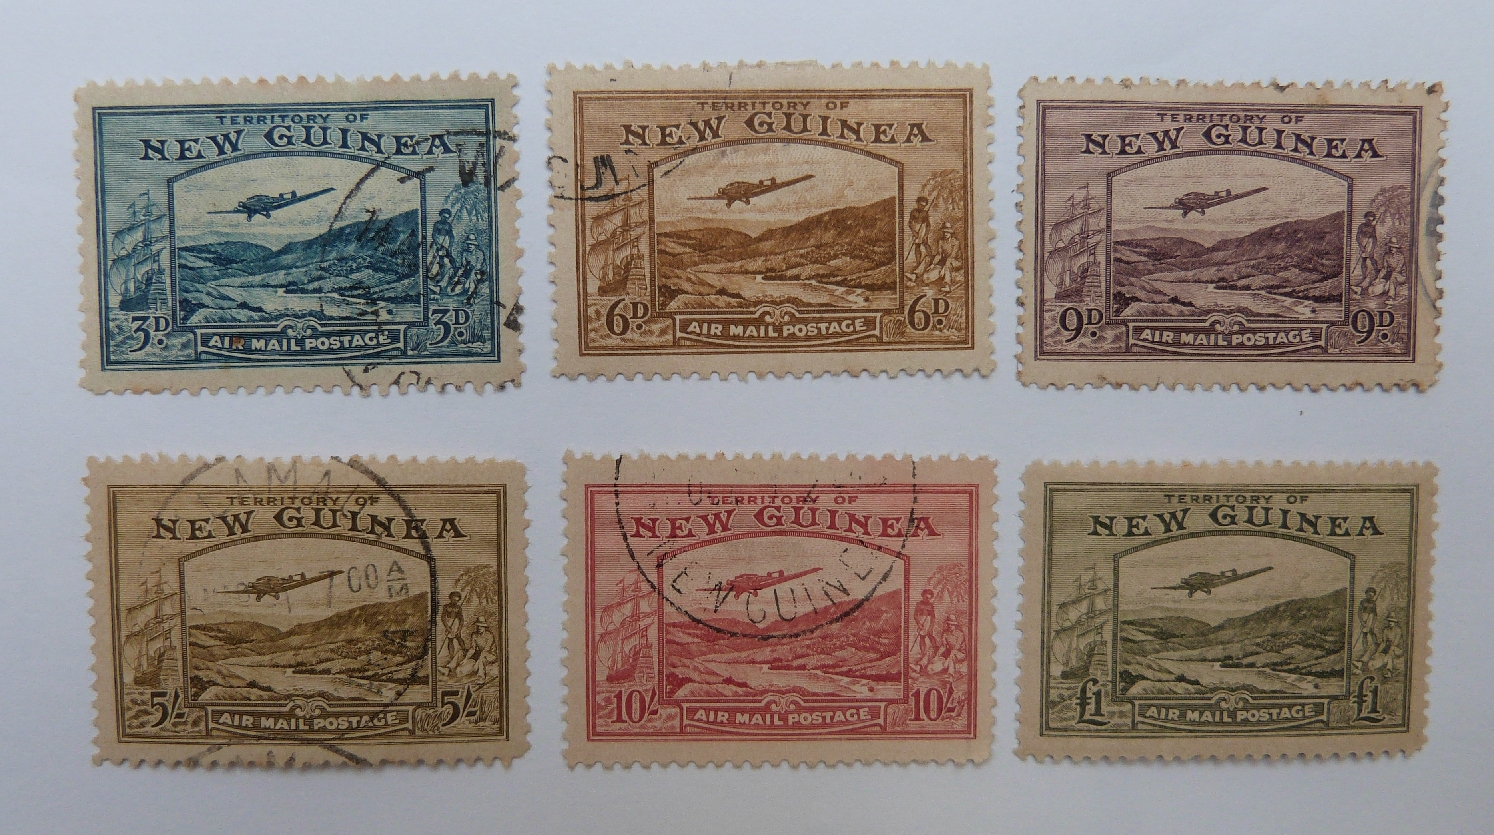 New Guinea 1939 part set light used stamps including 5s and 10s (SG 223 and 224). Also £1